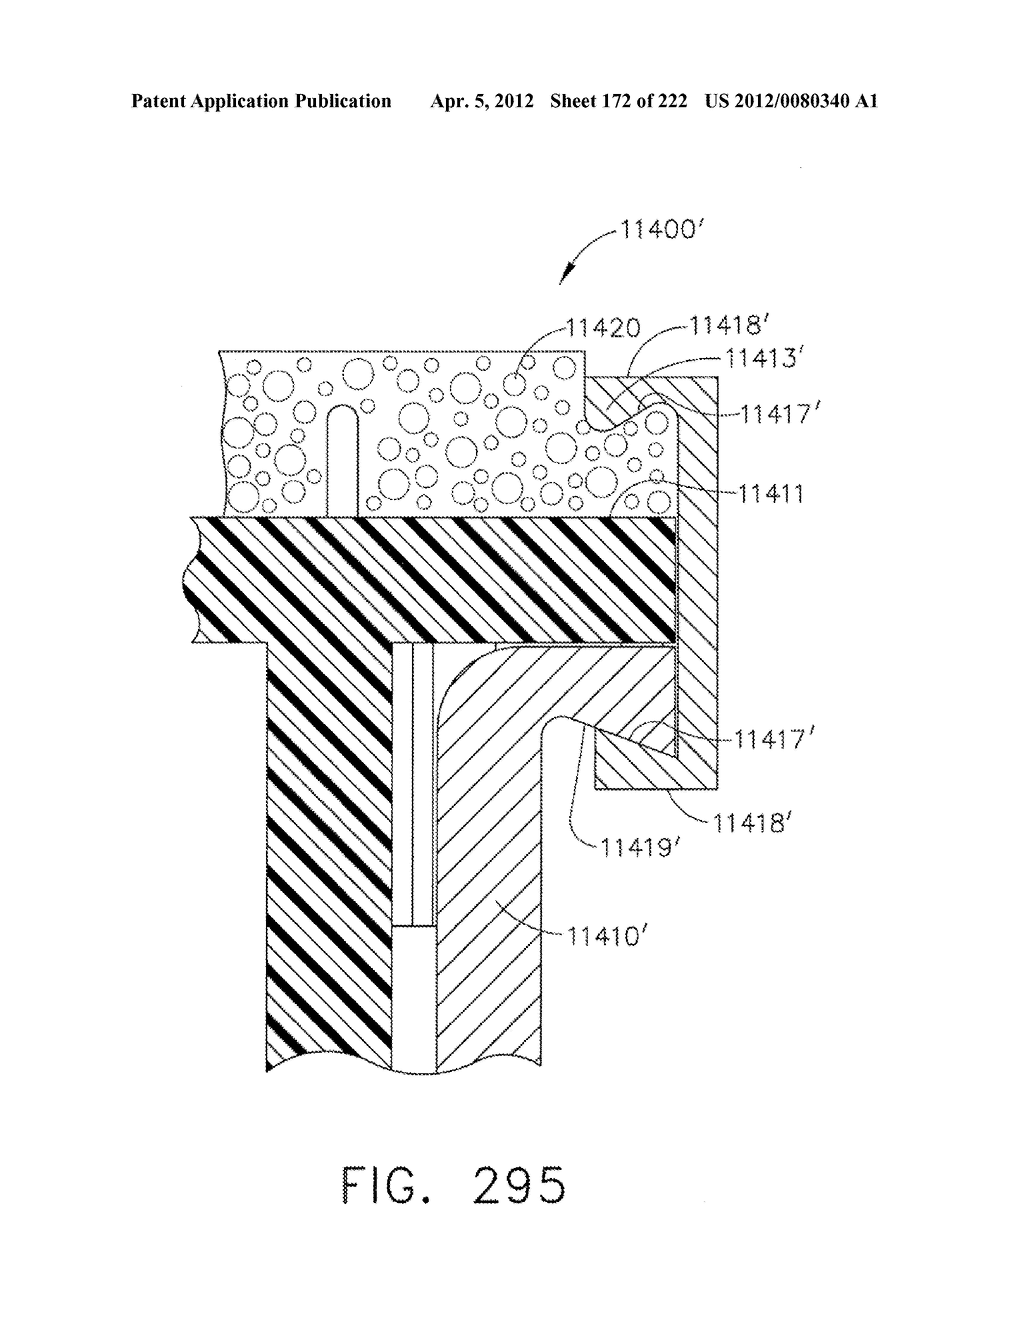 STAPLE CARTRIDGE COMPRISING A VARIABLE THICKNESS COMPRESSIBLE PORTION - diagram, schematic, and image 173